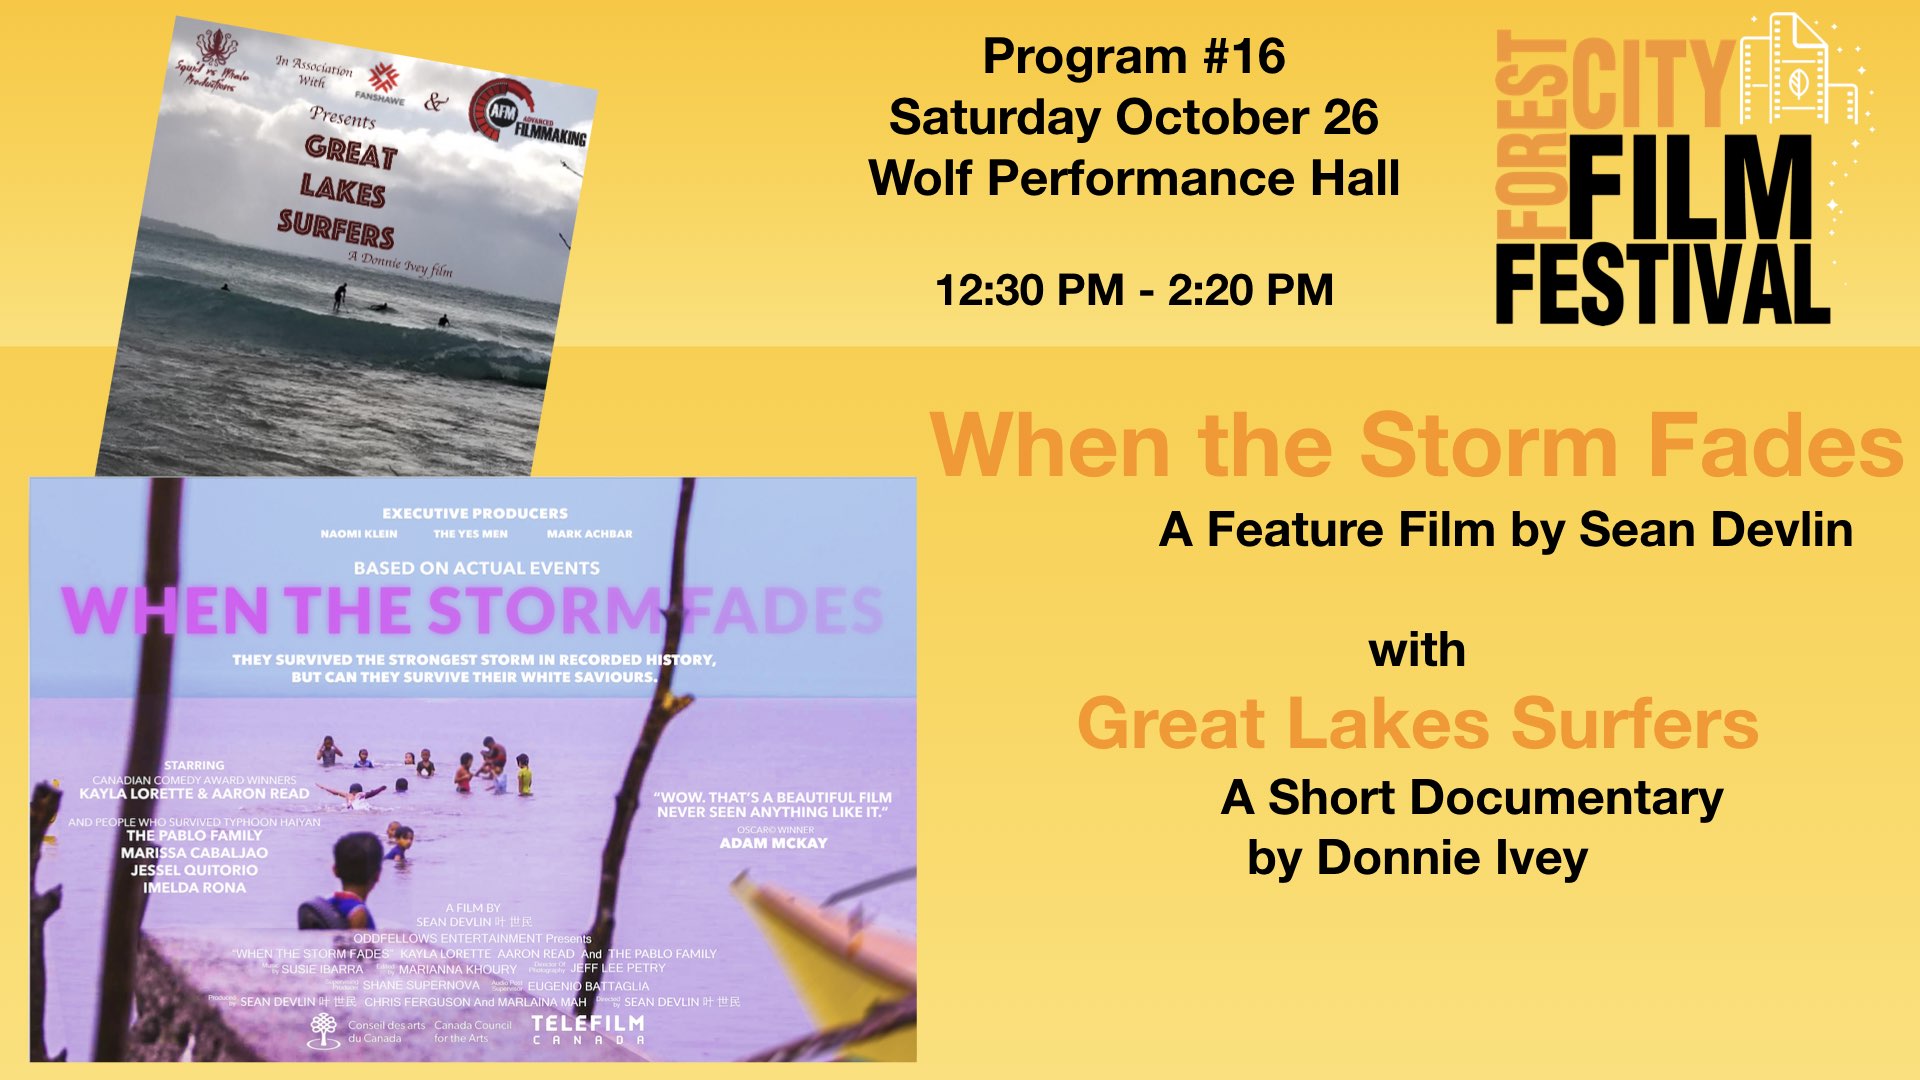 FCFF 2019 - Saturday Early Afternoon at Wolf Program #16 - When the Storm Fades & Great Lakes Surfers 